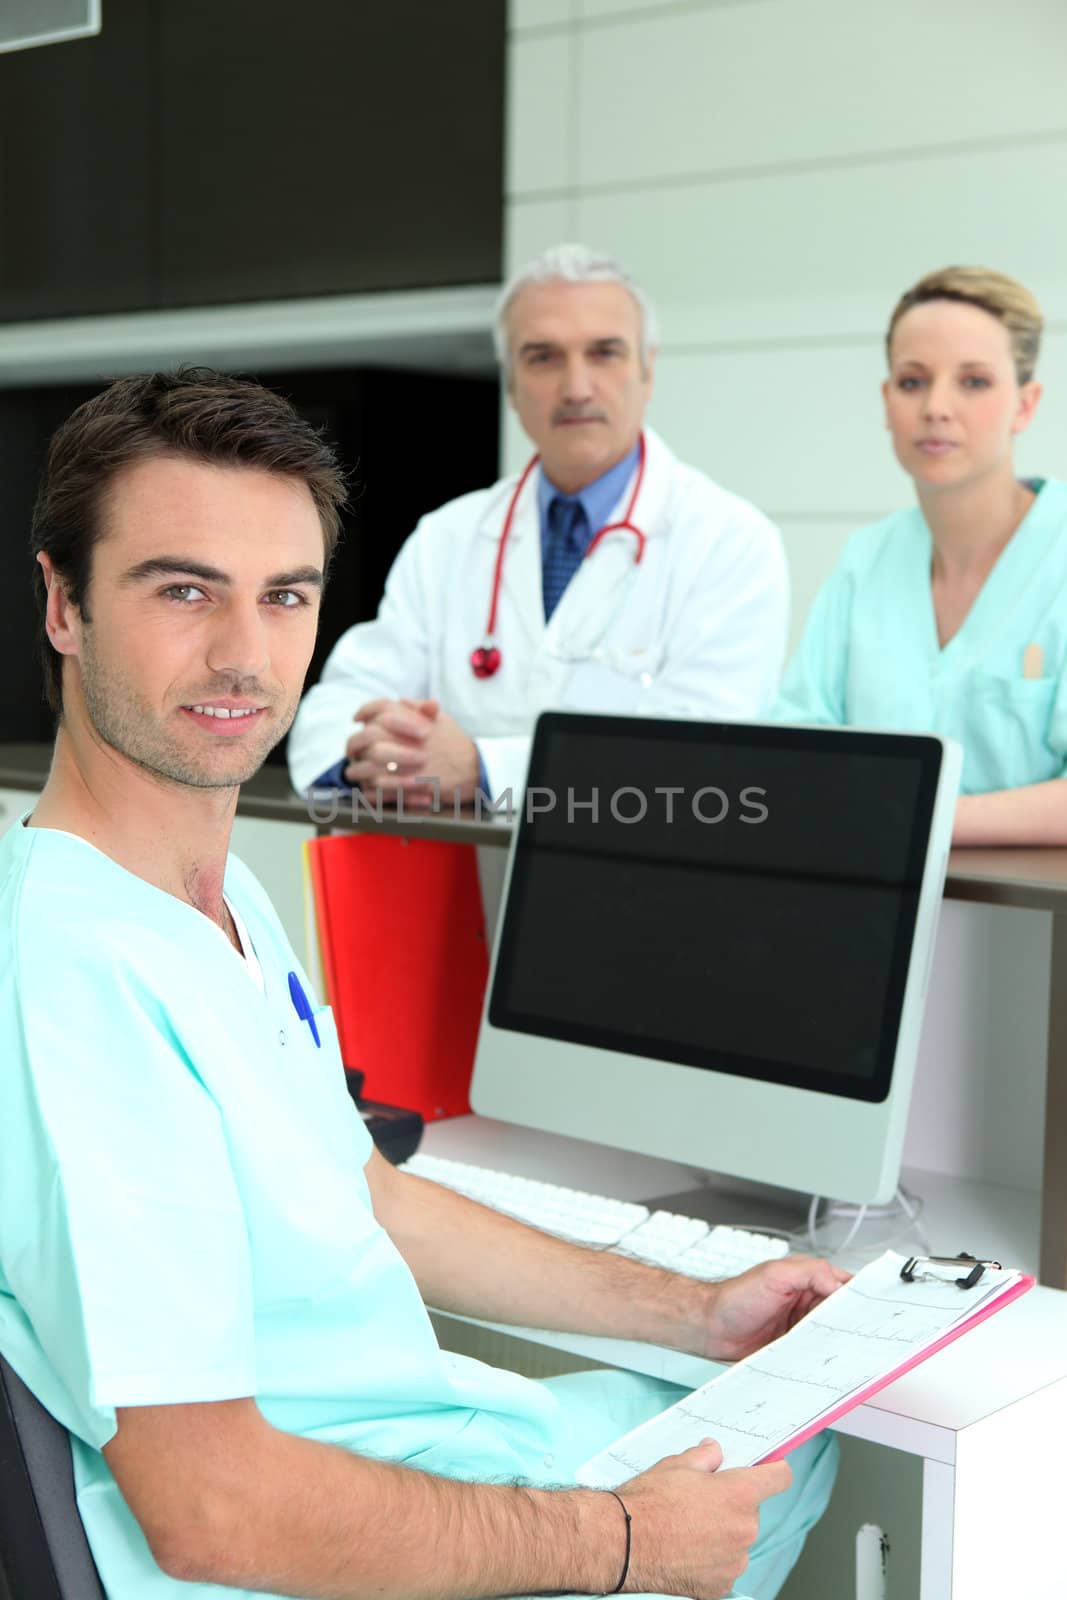 Doctors gathered around reception by phovoir